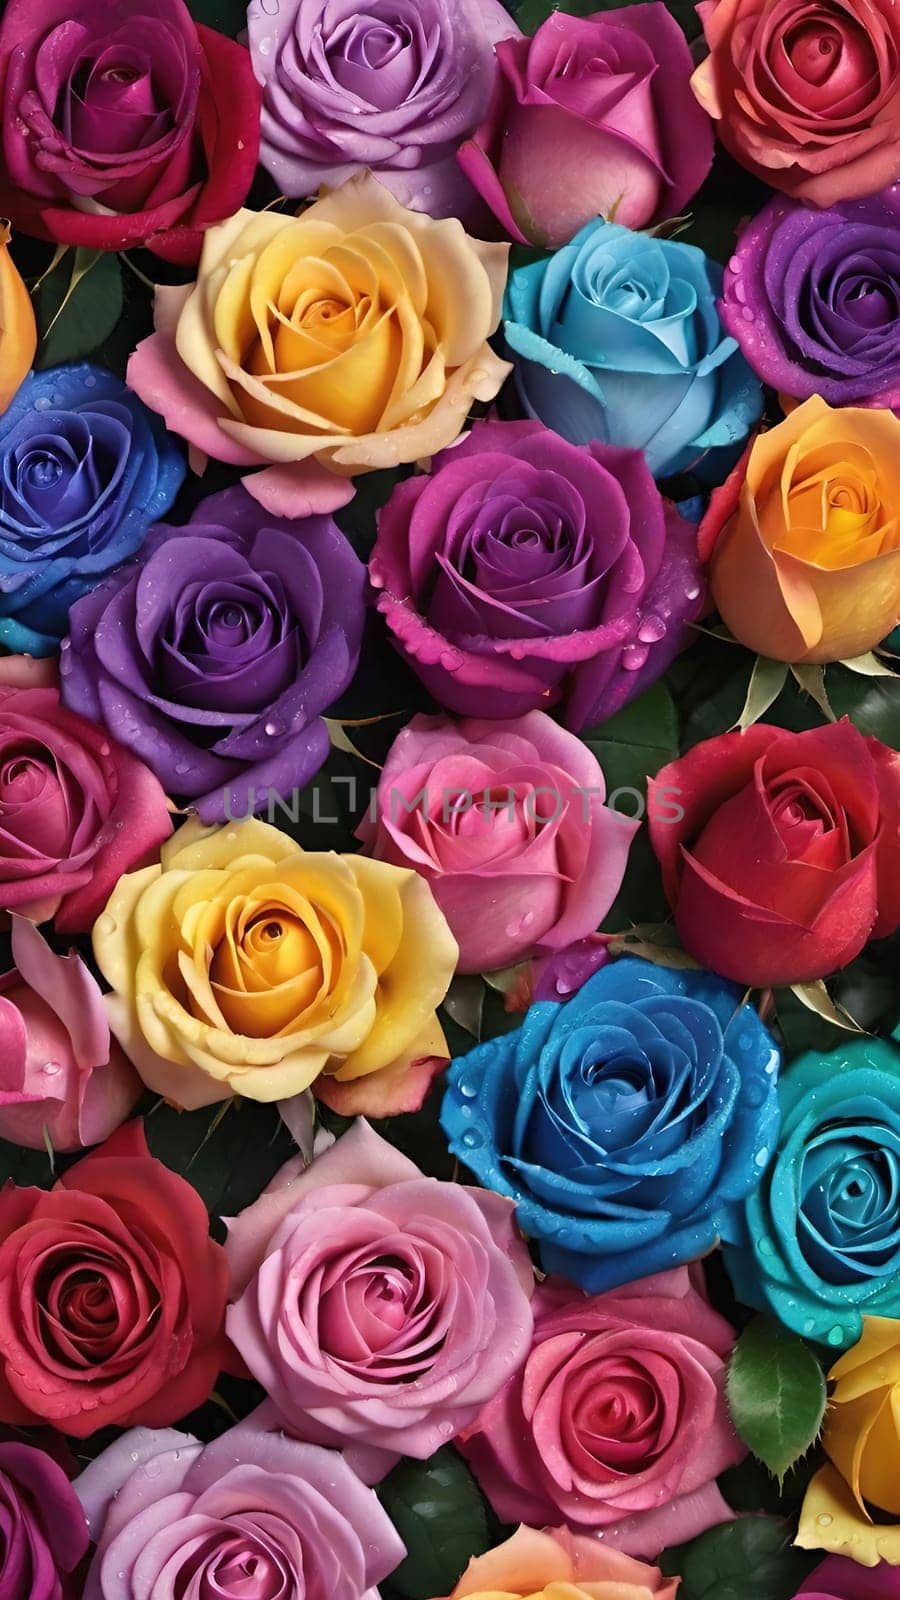 ulticolored roses as a background, top view, close up by yilmazsavaskandag